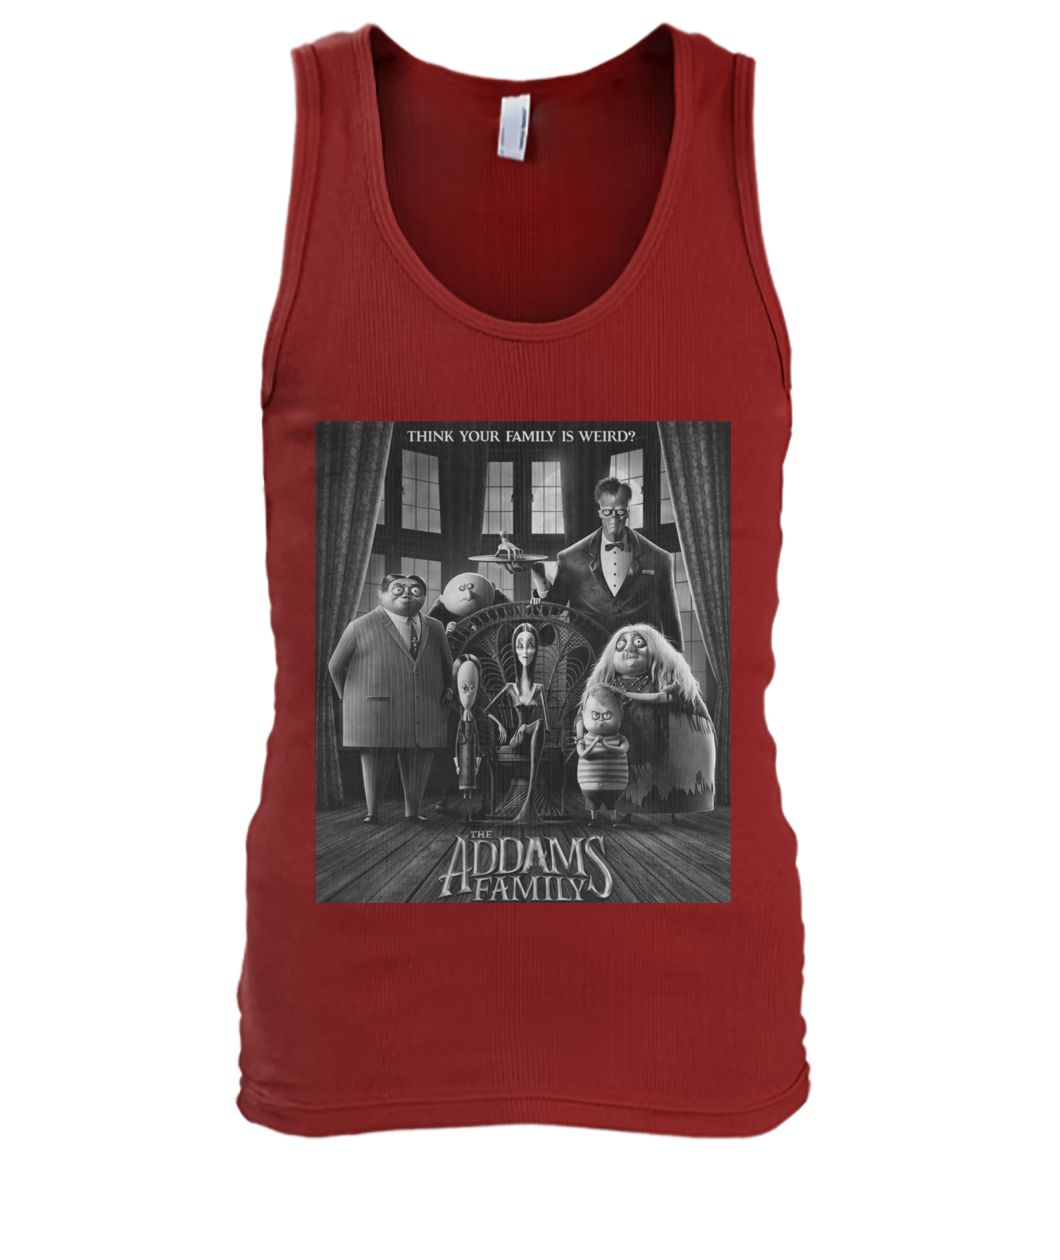 Think your family is weird the addams family men's tank top